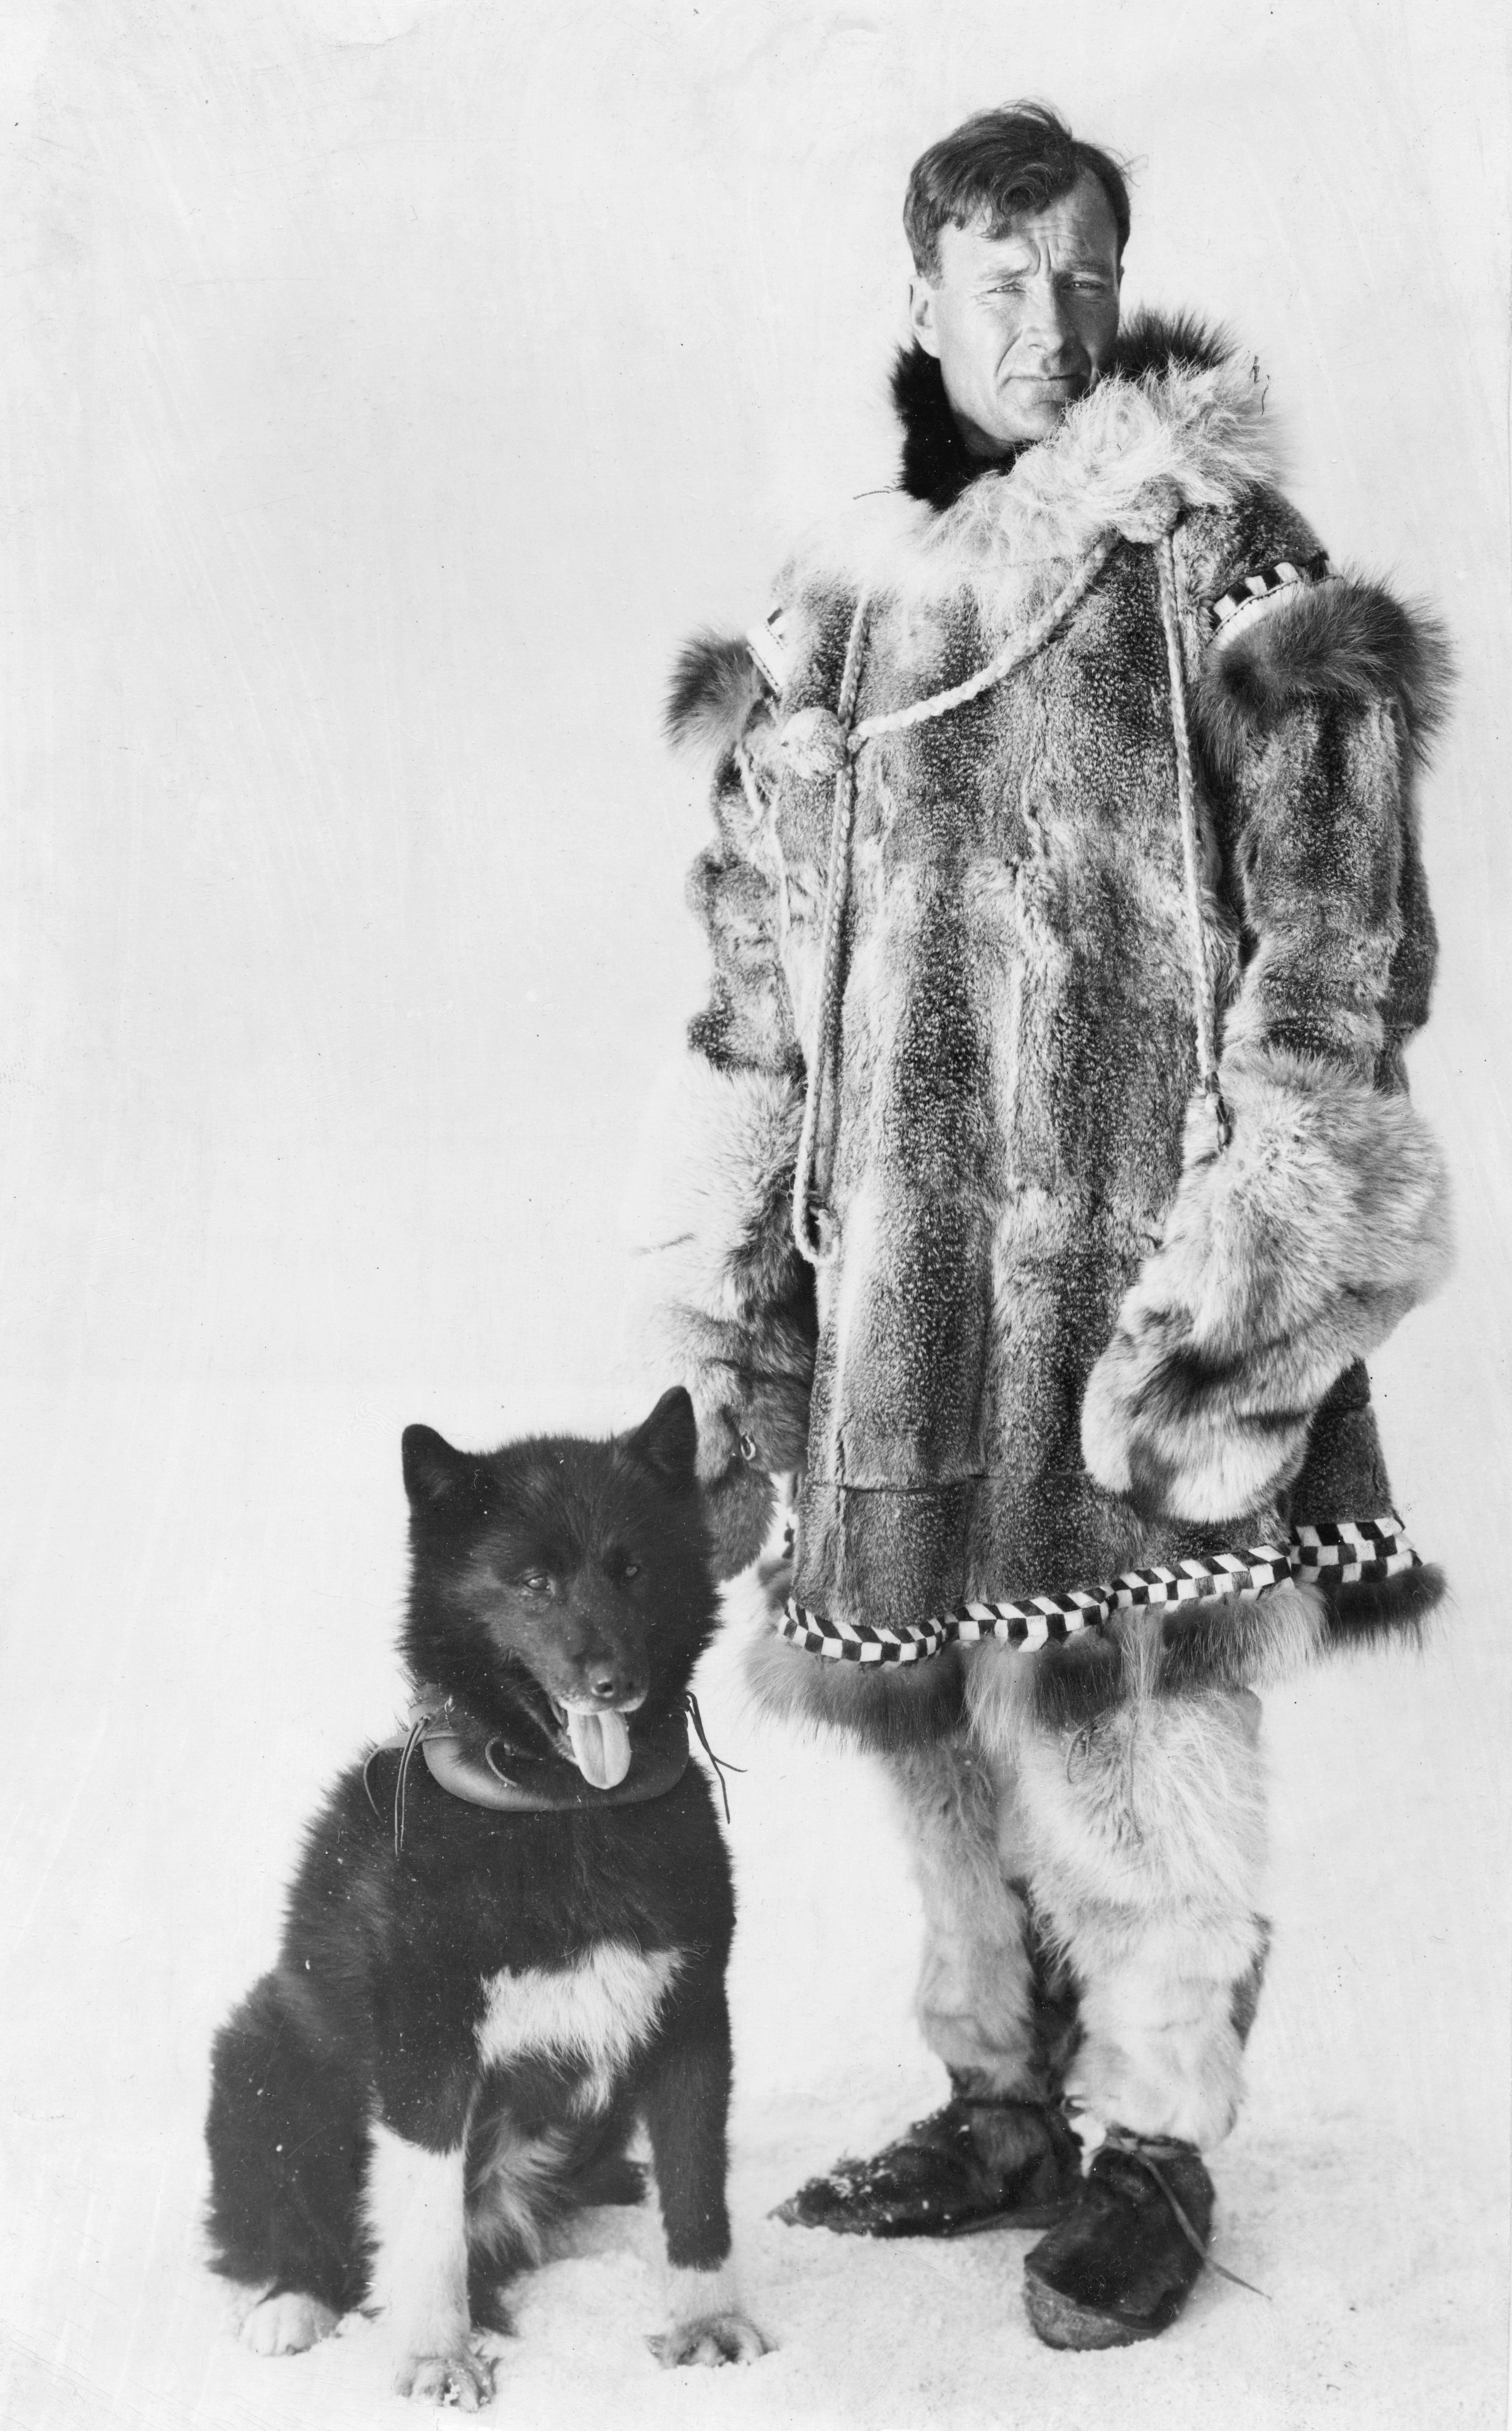 Scientists Sequence Genome of Famous Good Boy Balto the Sled Dog